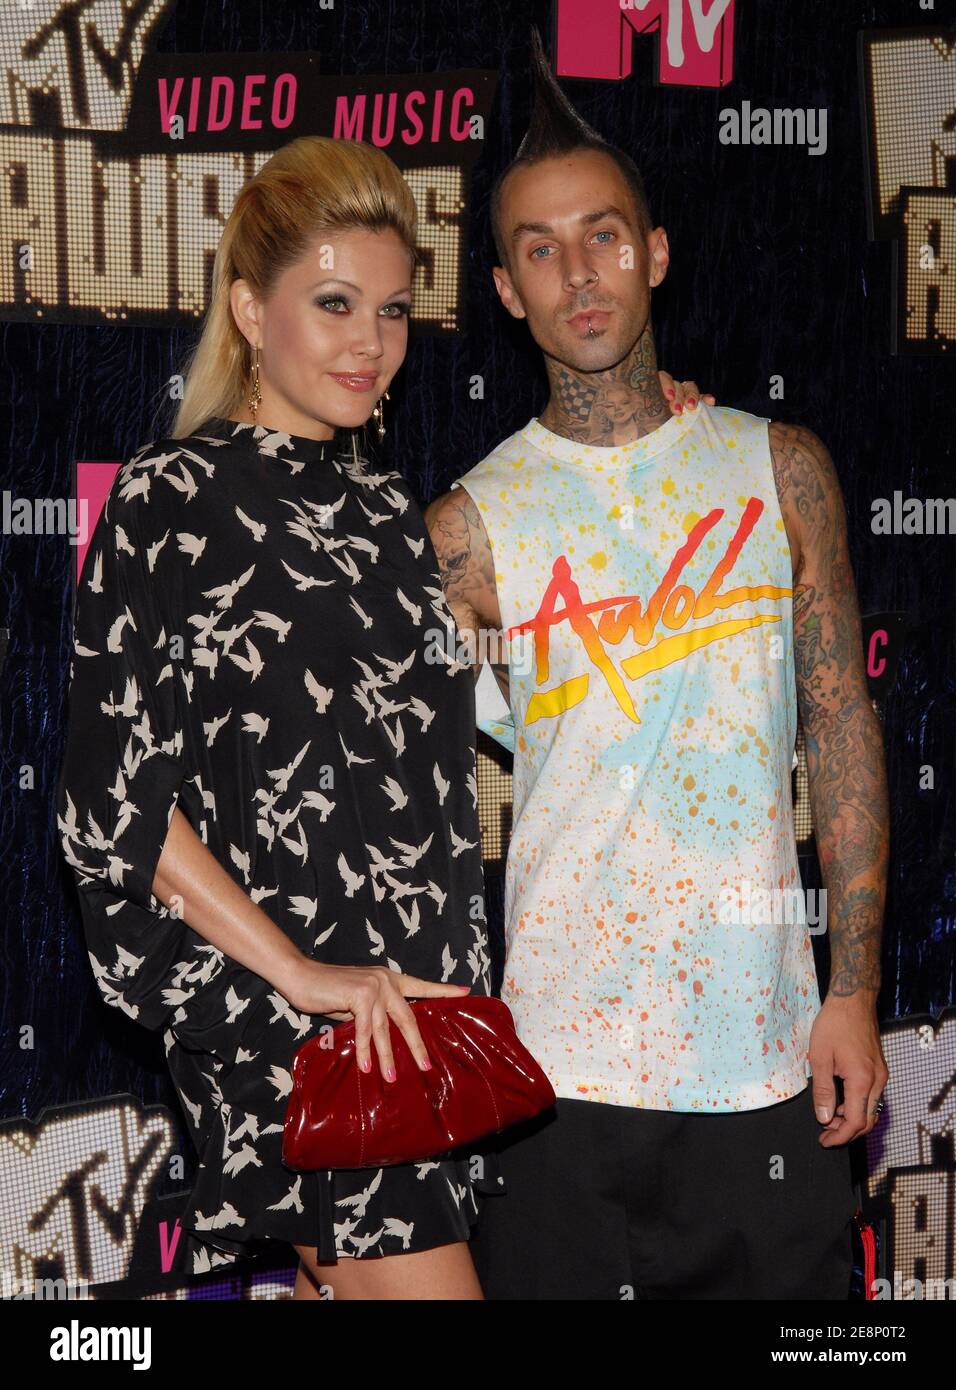 Shanna Moakler and musician Travis Barker attend the 2007 MTV Video Music Awards held at the Palms Casino Resort in Las Vegas, NV, USA on September 9, 2007. Photo by Lionel Hahn/ABACAPRESS.COM Stock Photo